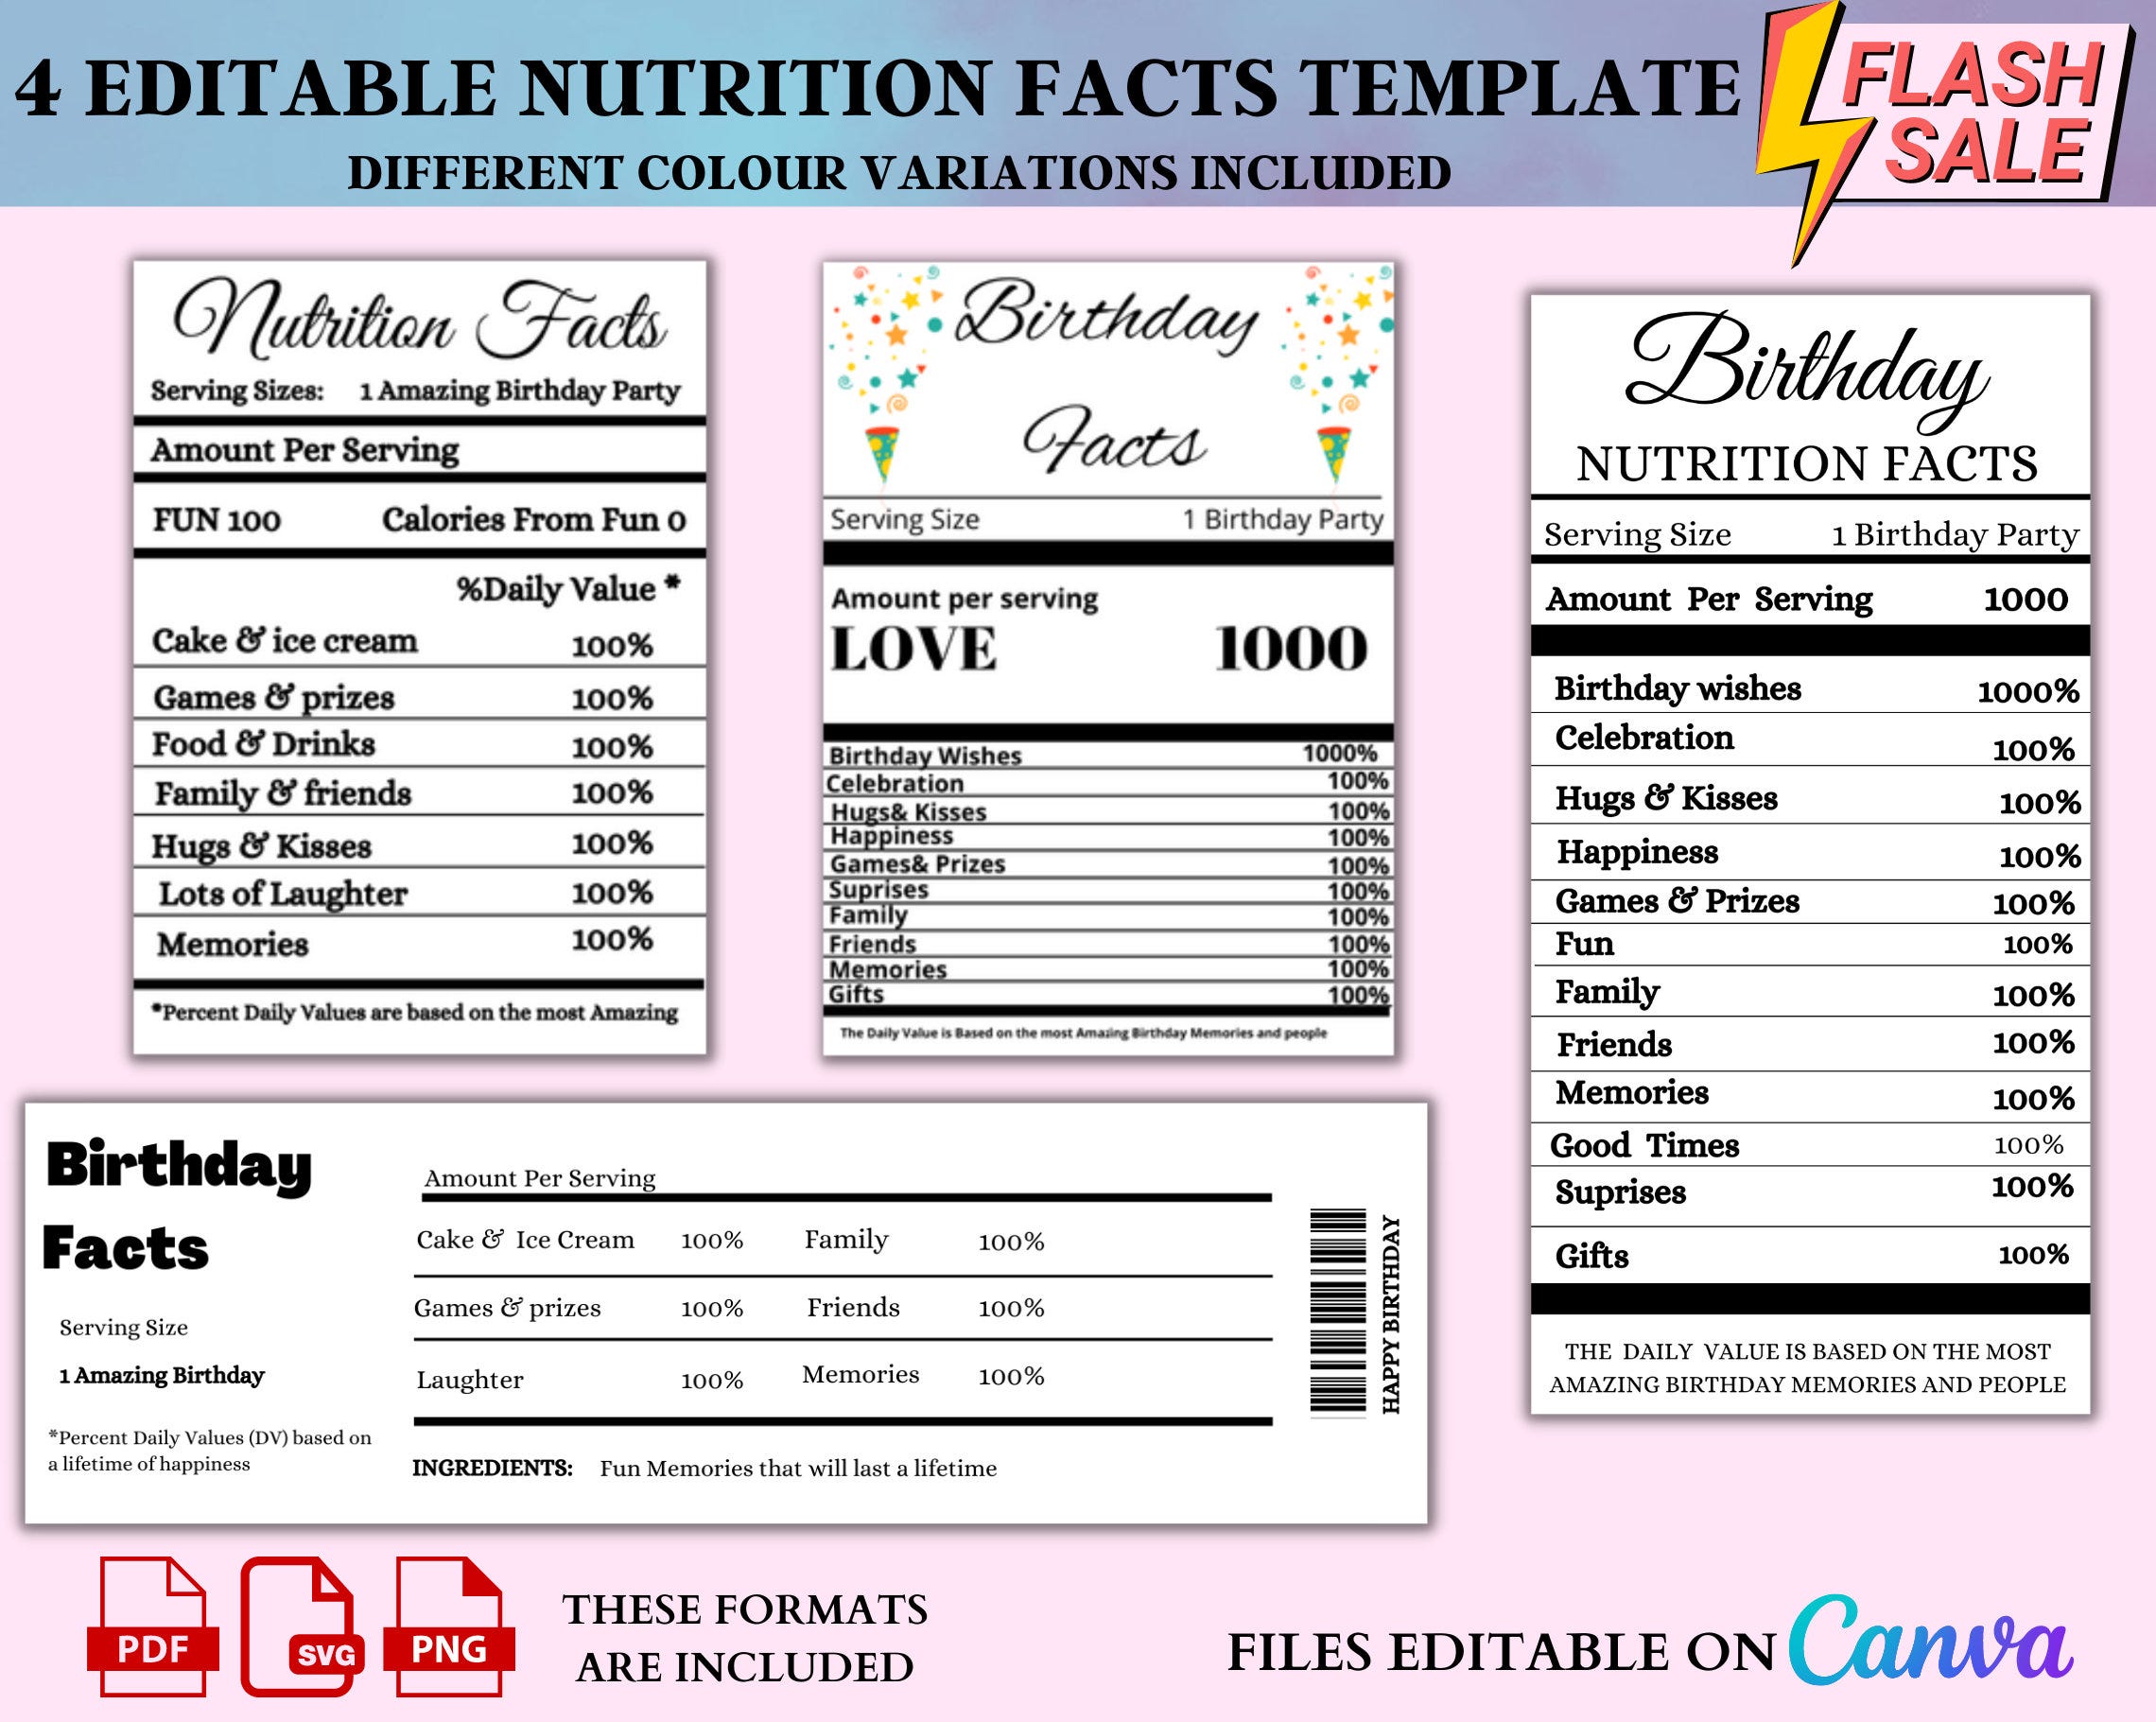 Nutrition Facts | Editable Nutrition | Instant Download | Nutrition PNG | Blank Nutrition Template | Nutrition Facts Shirt | Nutrition